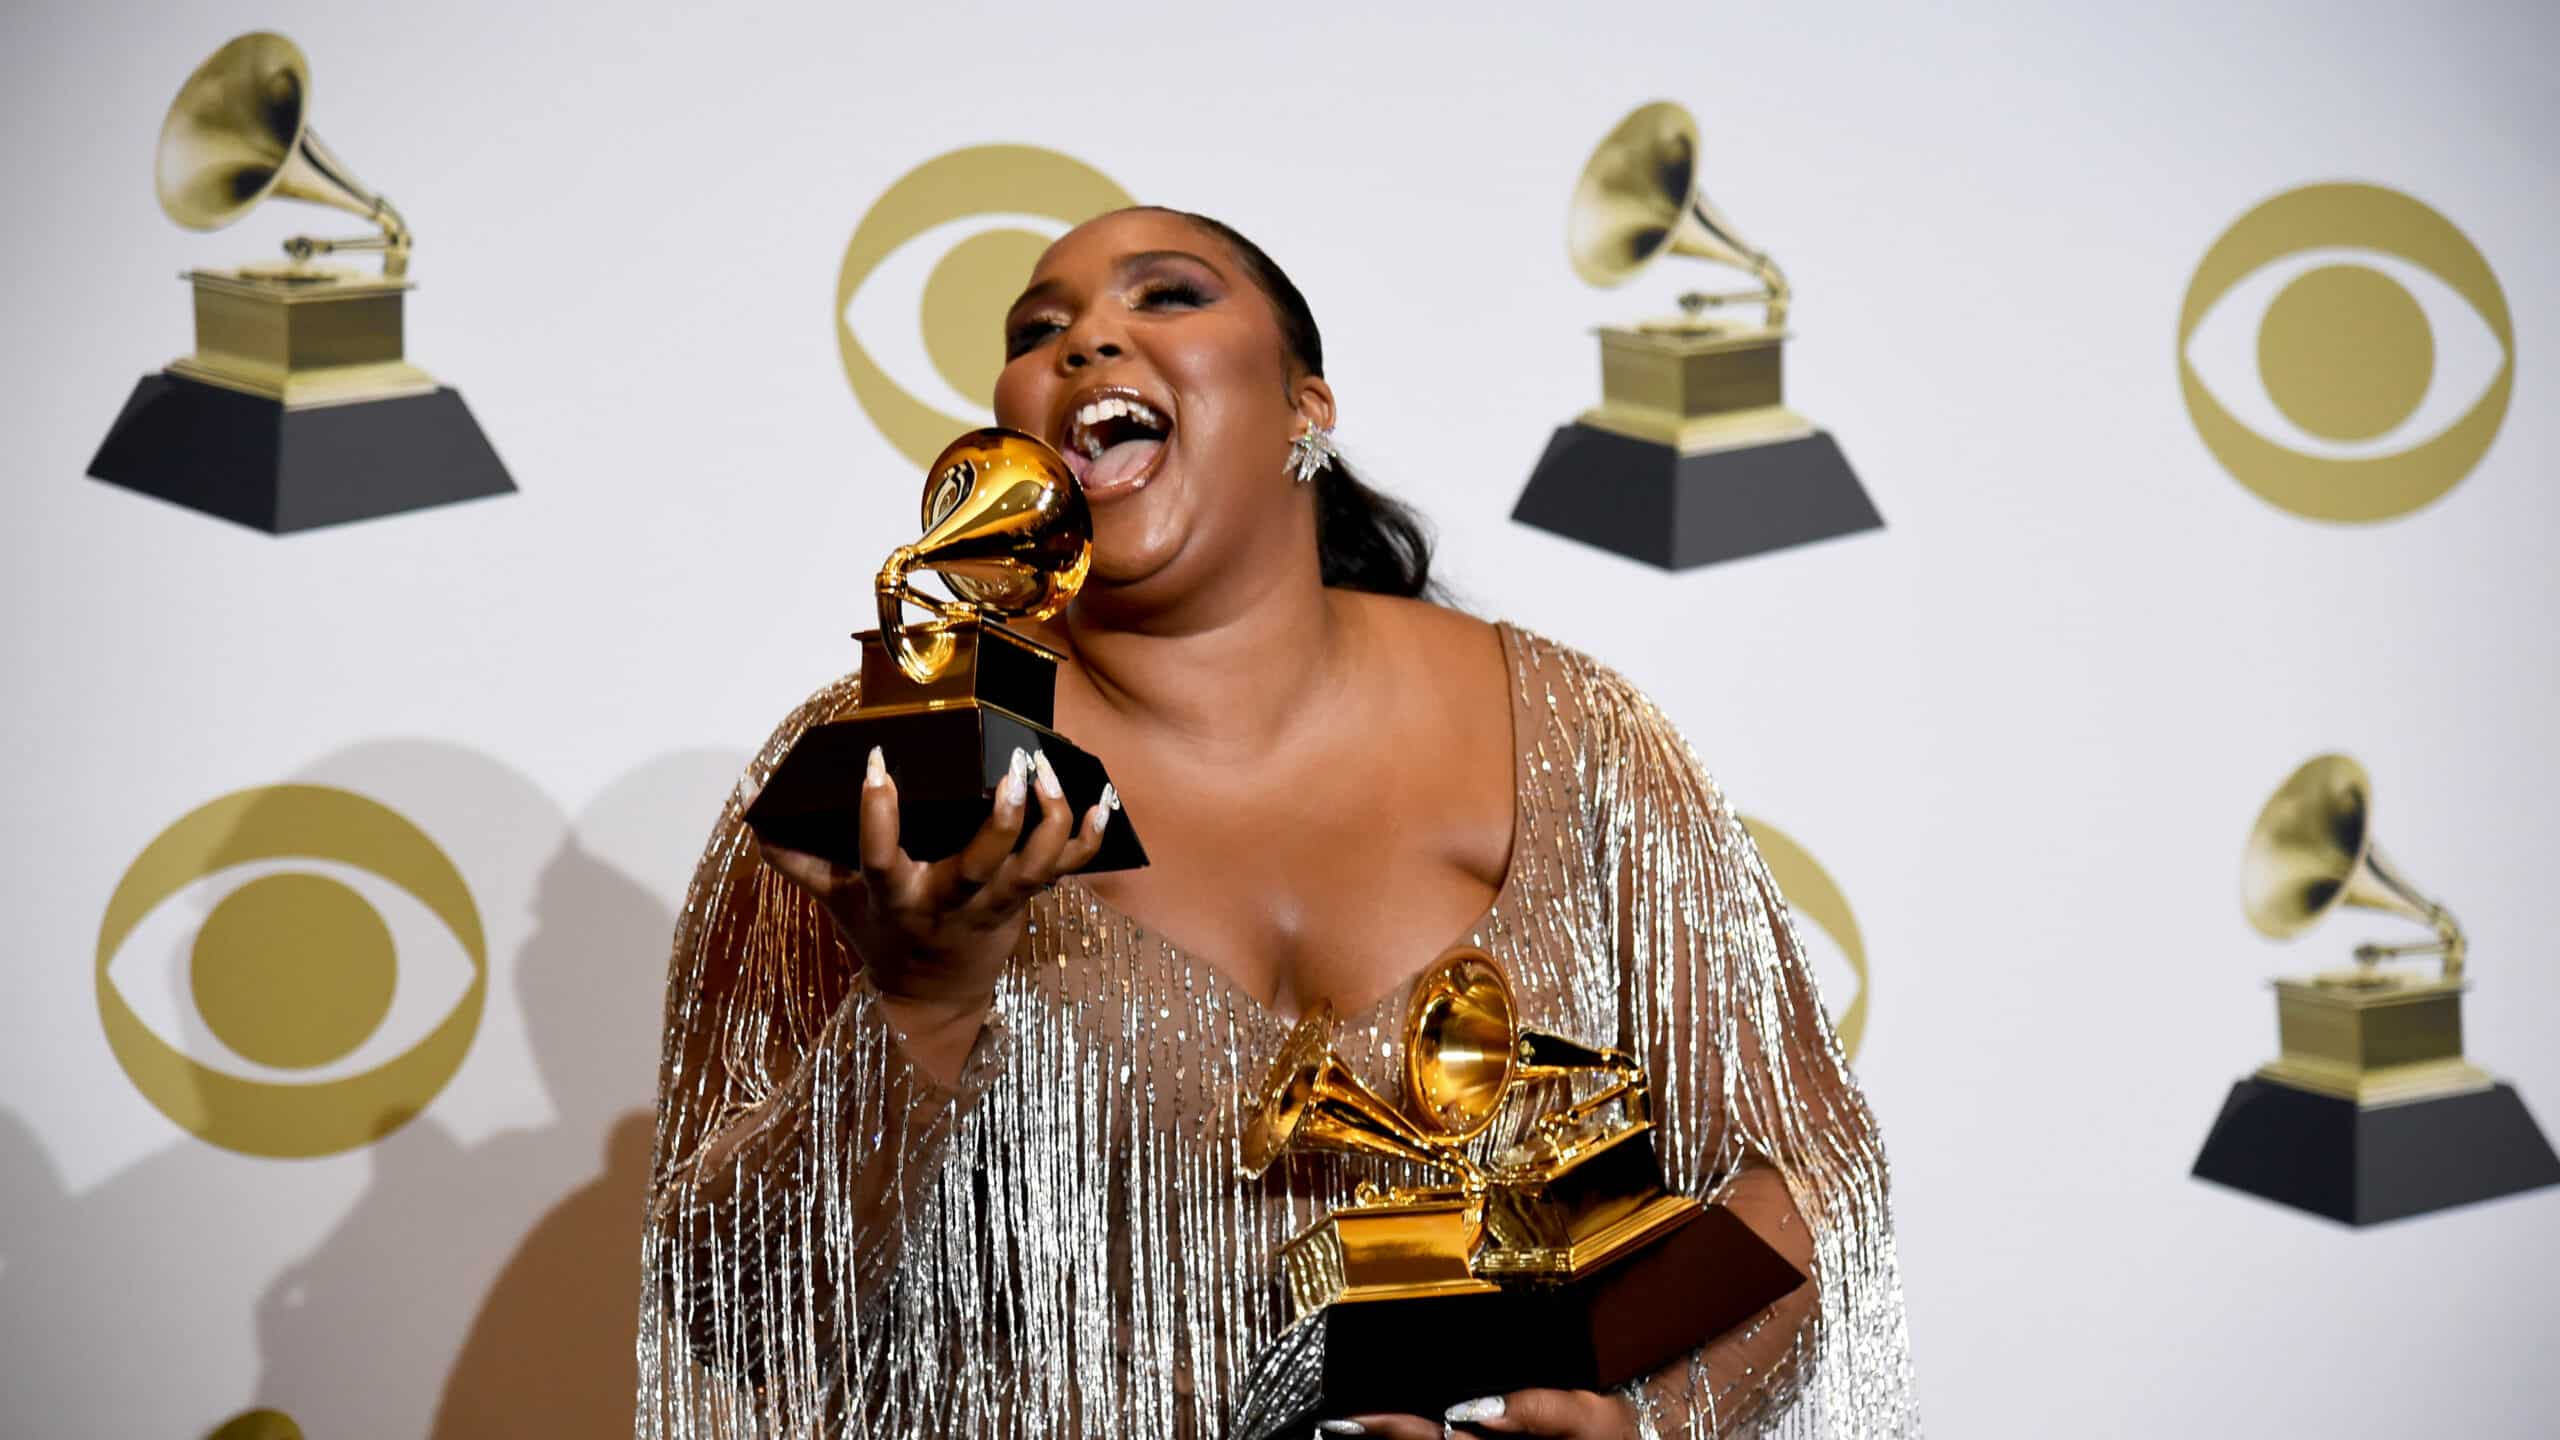 Lizzo, winner of Best Pop Solo Performance, Best Traditional R&B Performance and Best Urban Contemporary Album, poses in the press room during the 62nd Annual GRAMMY Awards at Staples Center on January 26, 2020 in Los Angeles, California.